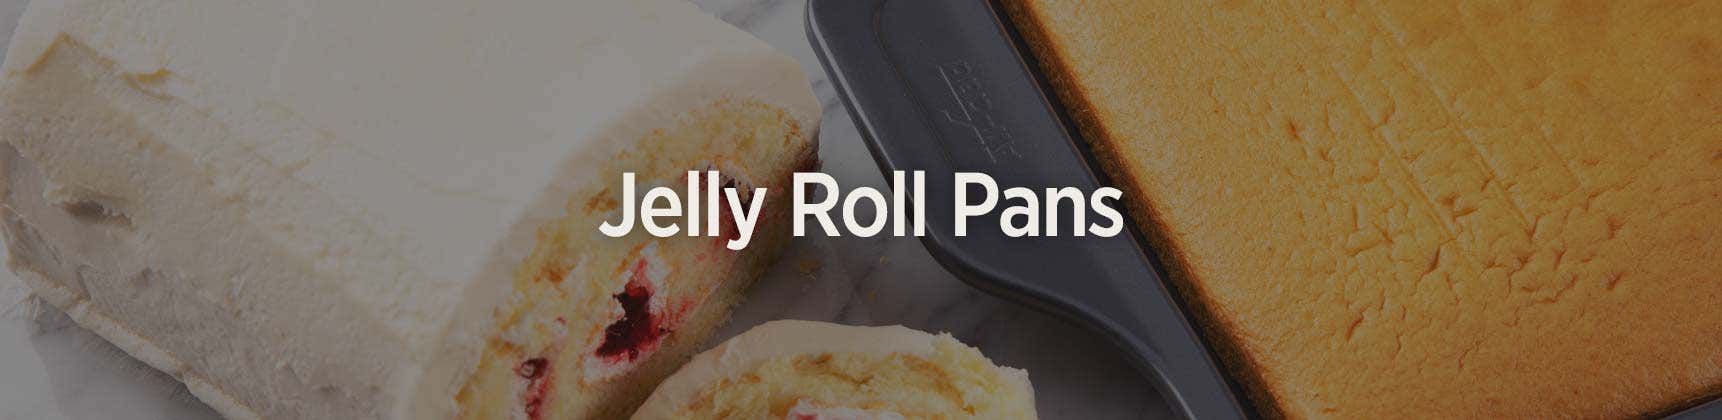 Jelly Roll Pans